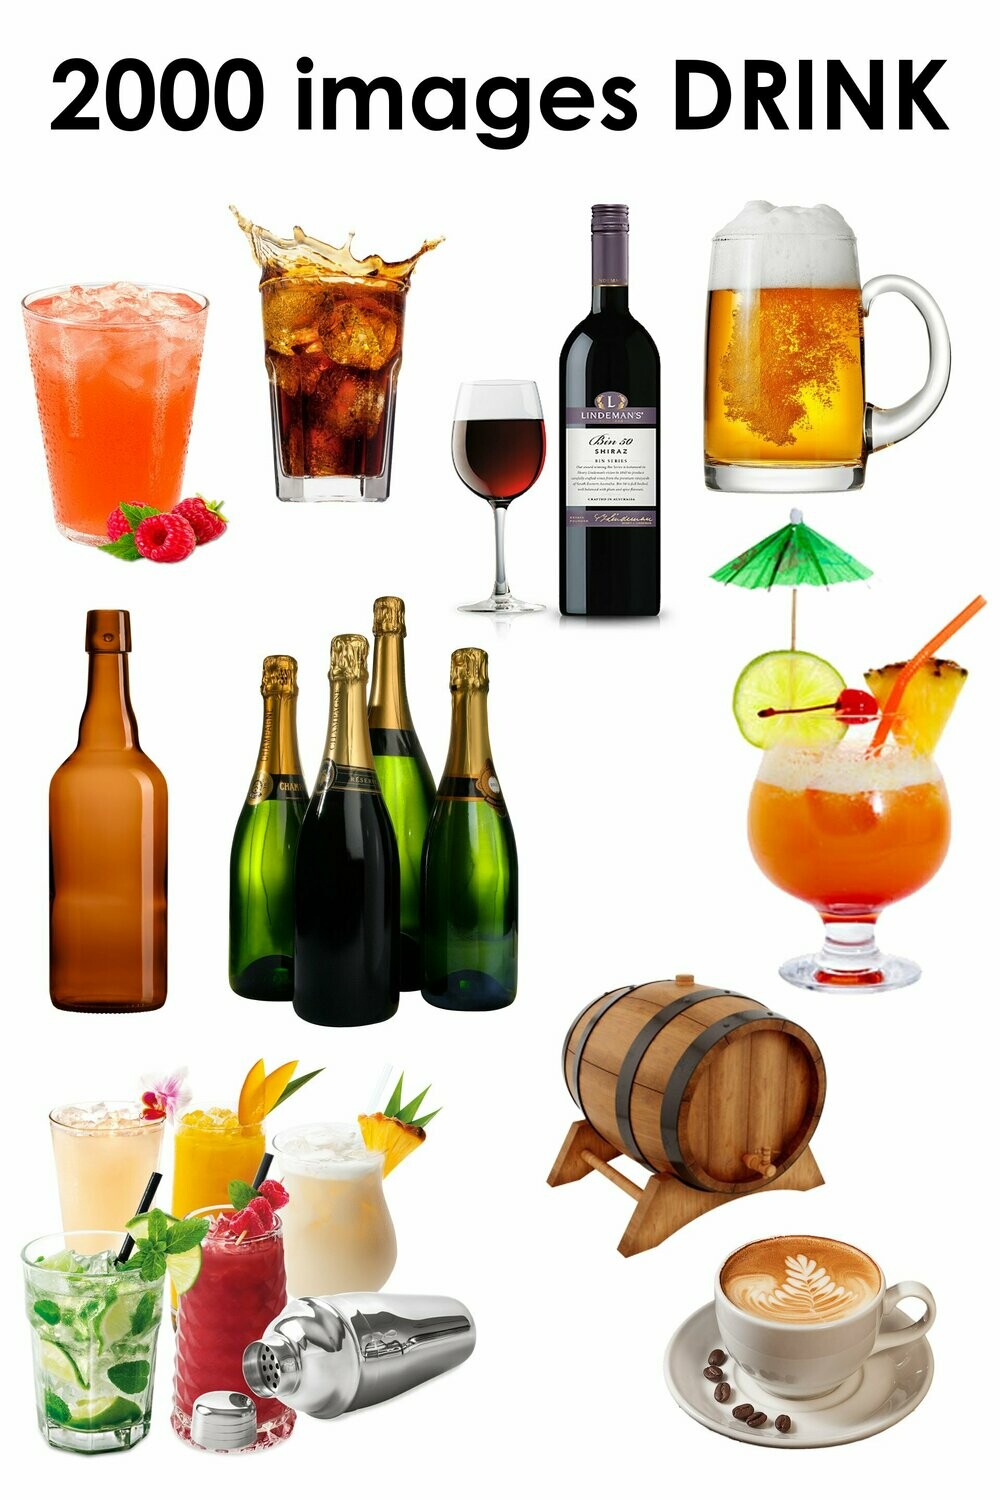 E. PACK DRINK 2000 PNG